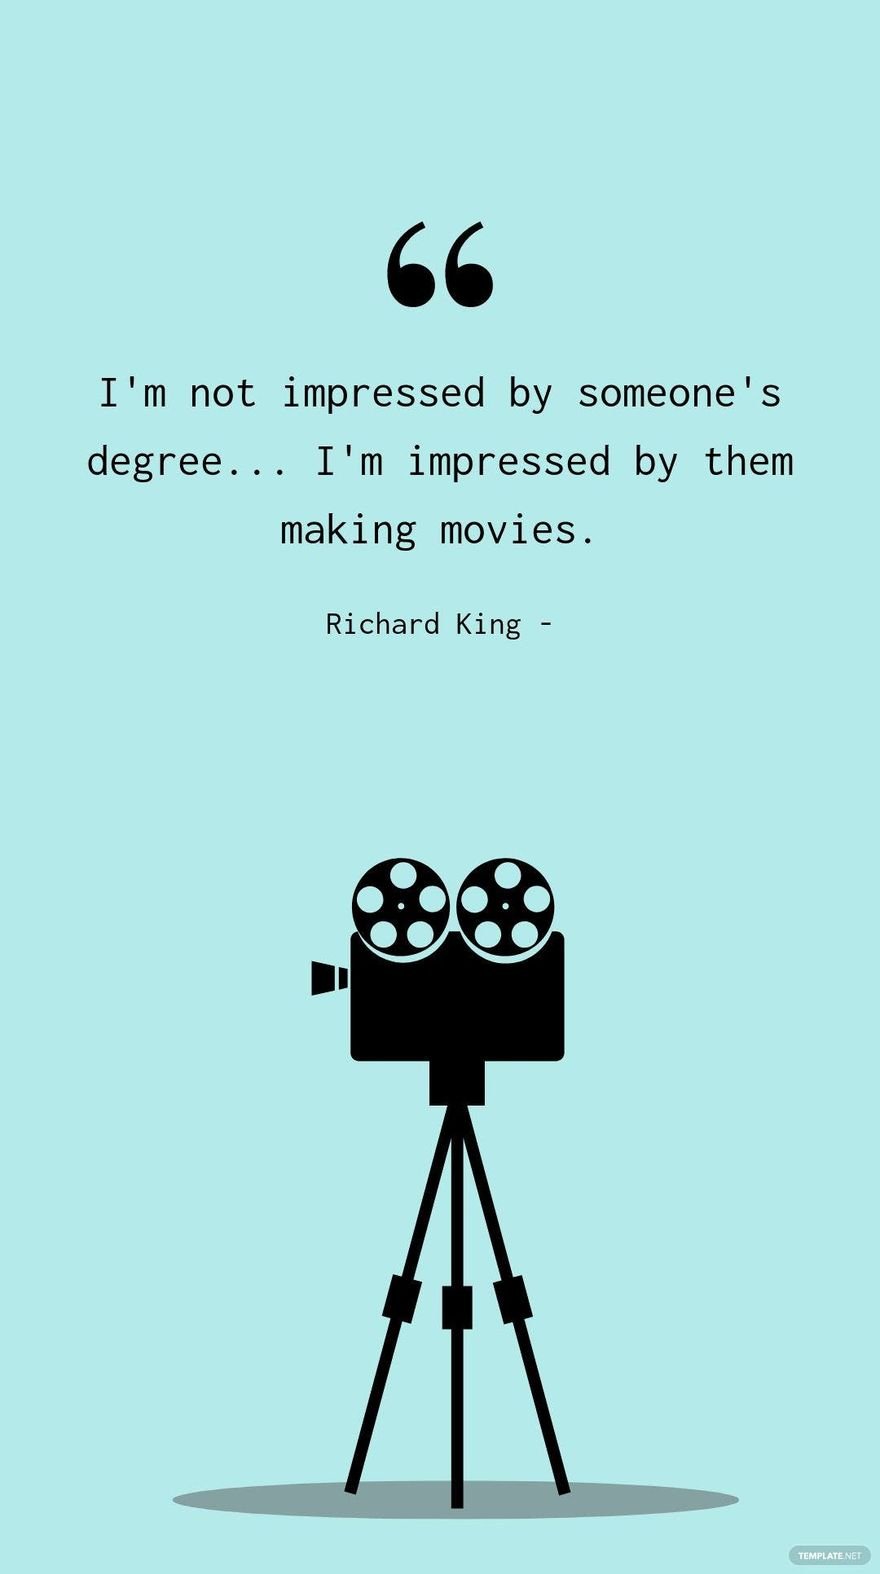 Free Richard King - I'm not impressed by someone's degree... I'm impressed by them making movies. in JPG